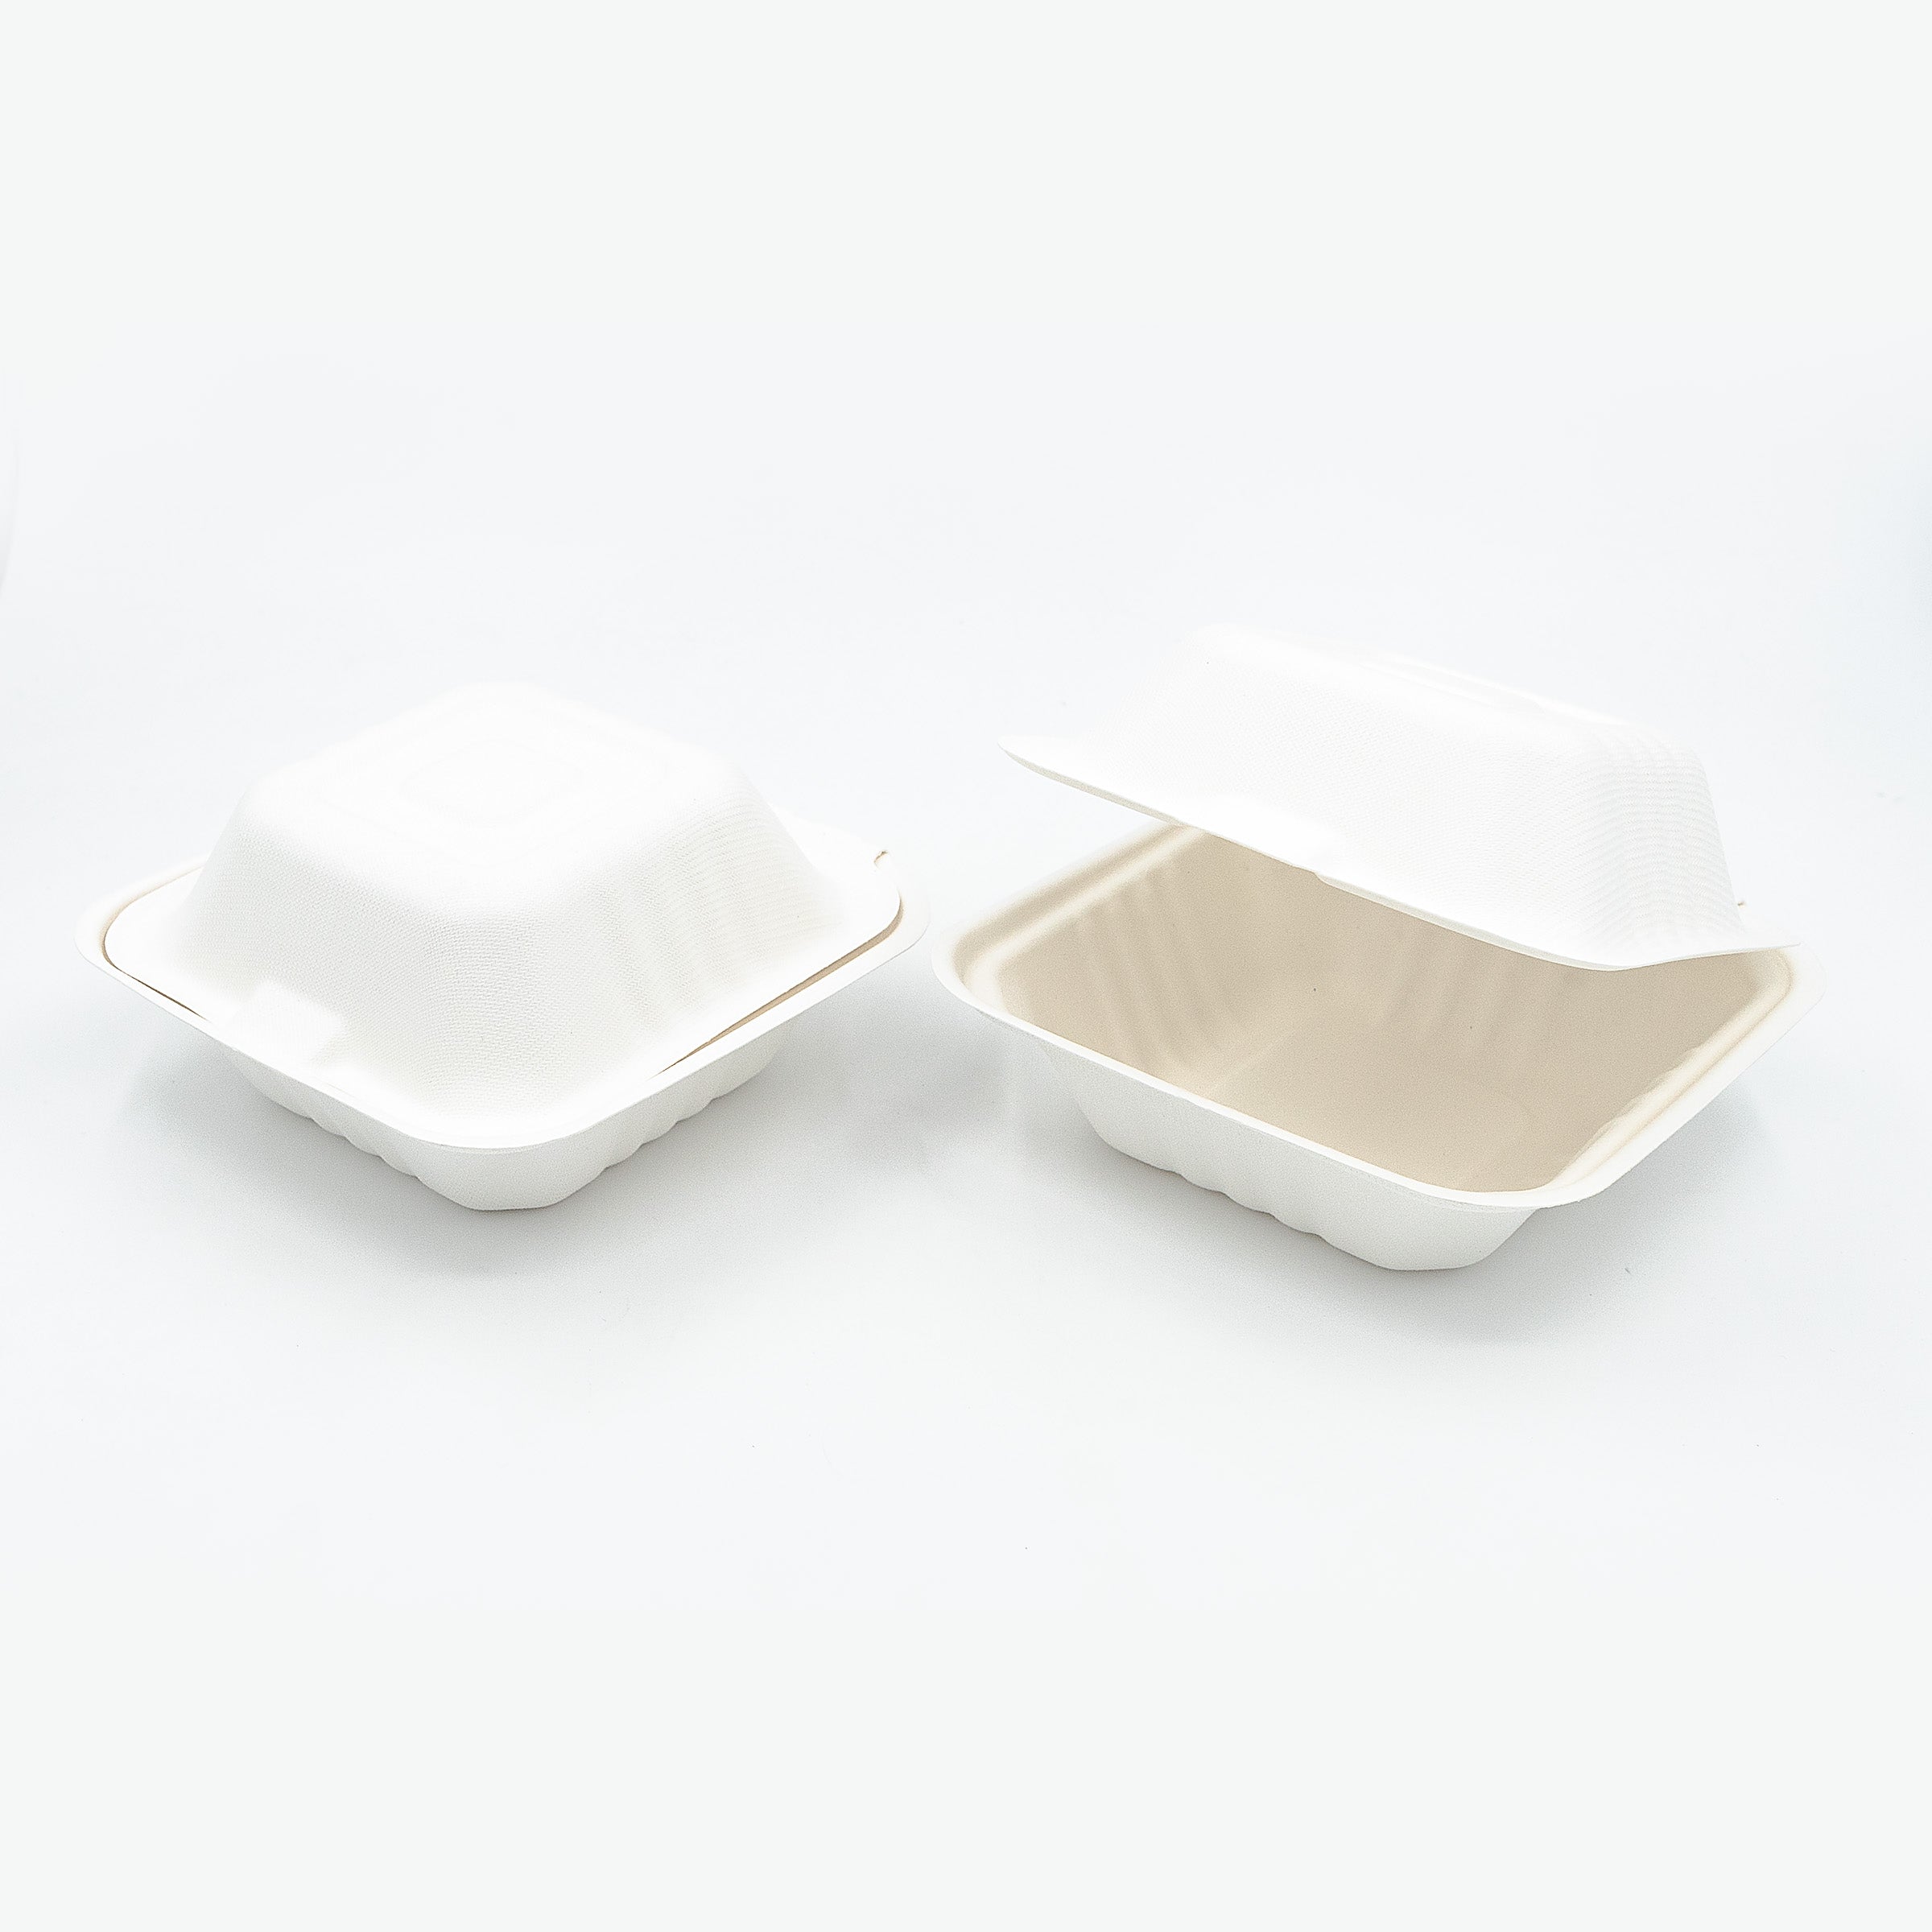 6 x 6 x 3" White Ecocane Clamshell Container